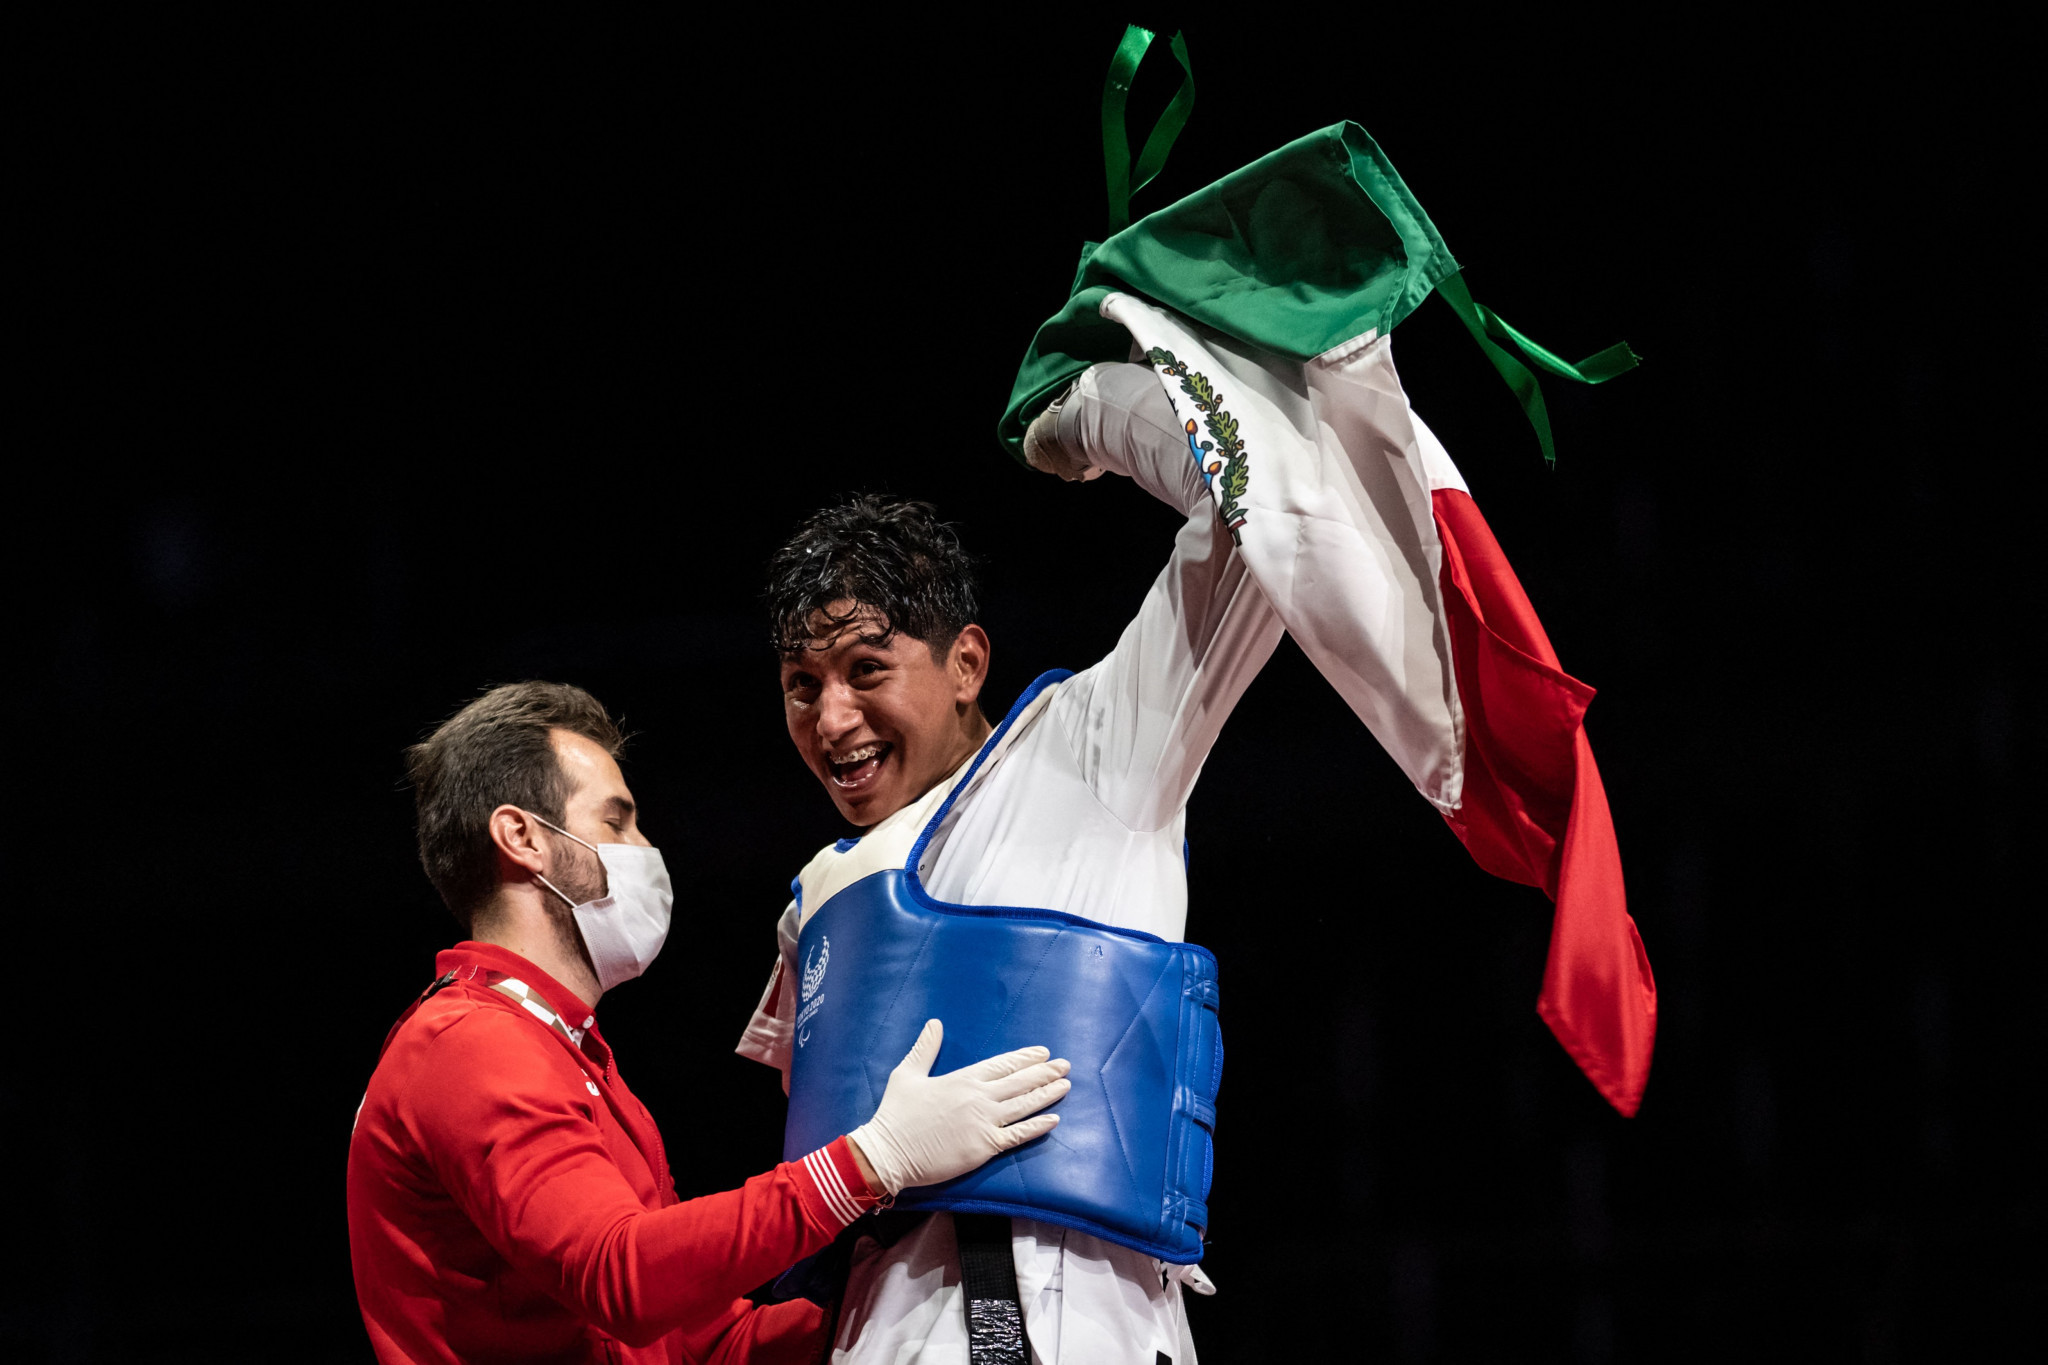 Four fighters become undisputed champions at Para Taekwondo Grand Prix in Manchester 